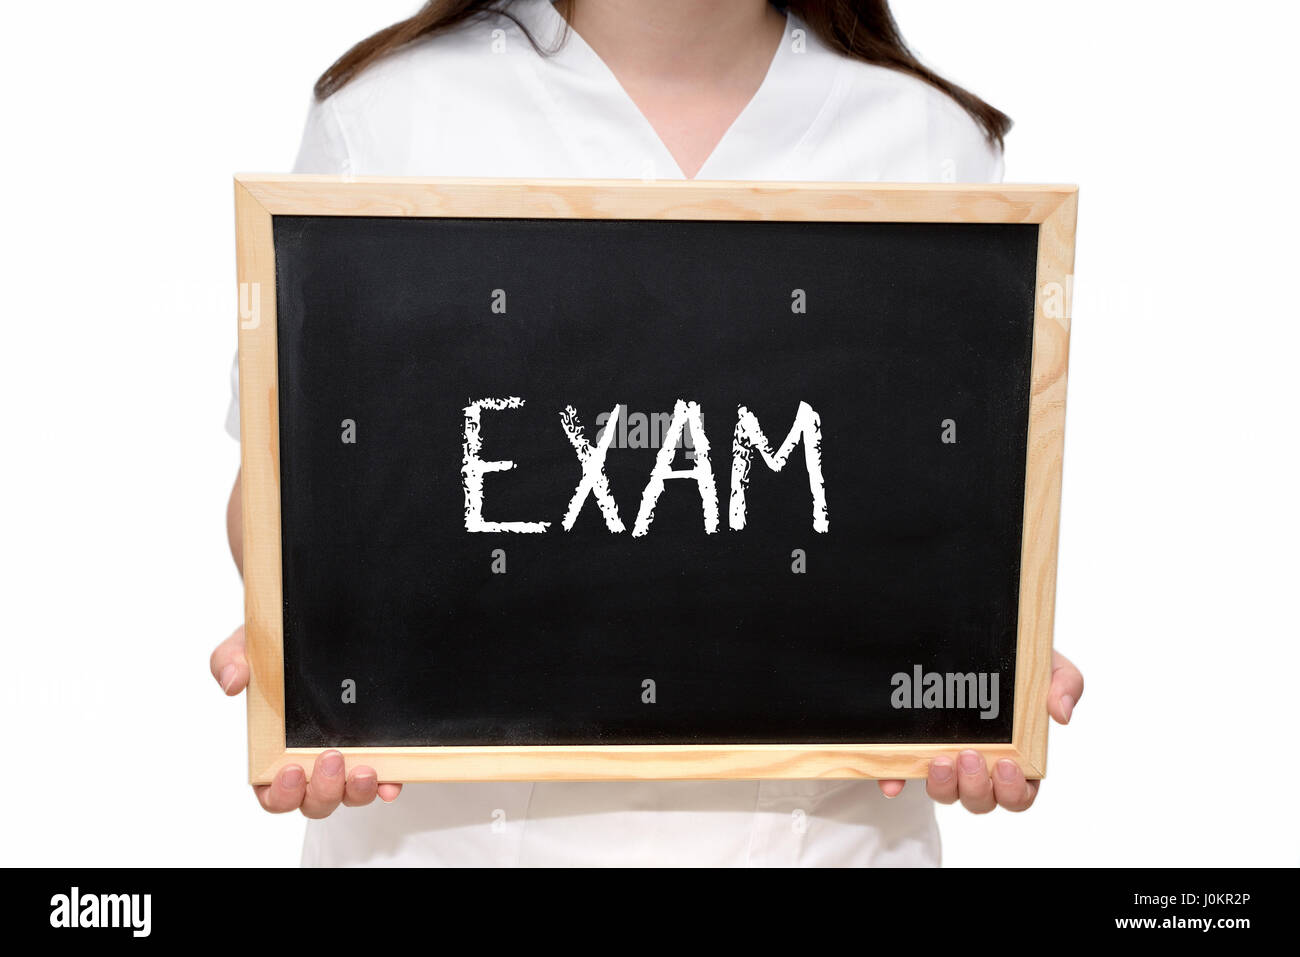 Female nurse holding a slate board with the text Exam written with chalk, isolated on white background. Stock Photo